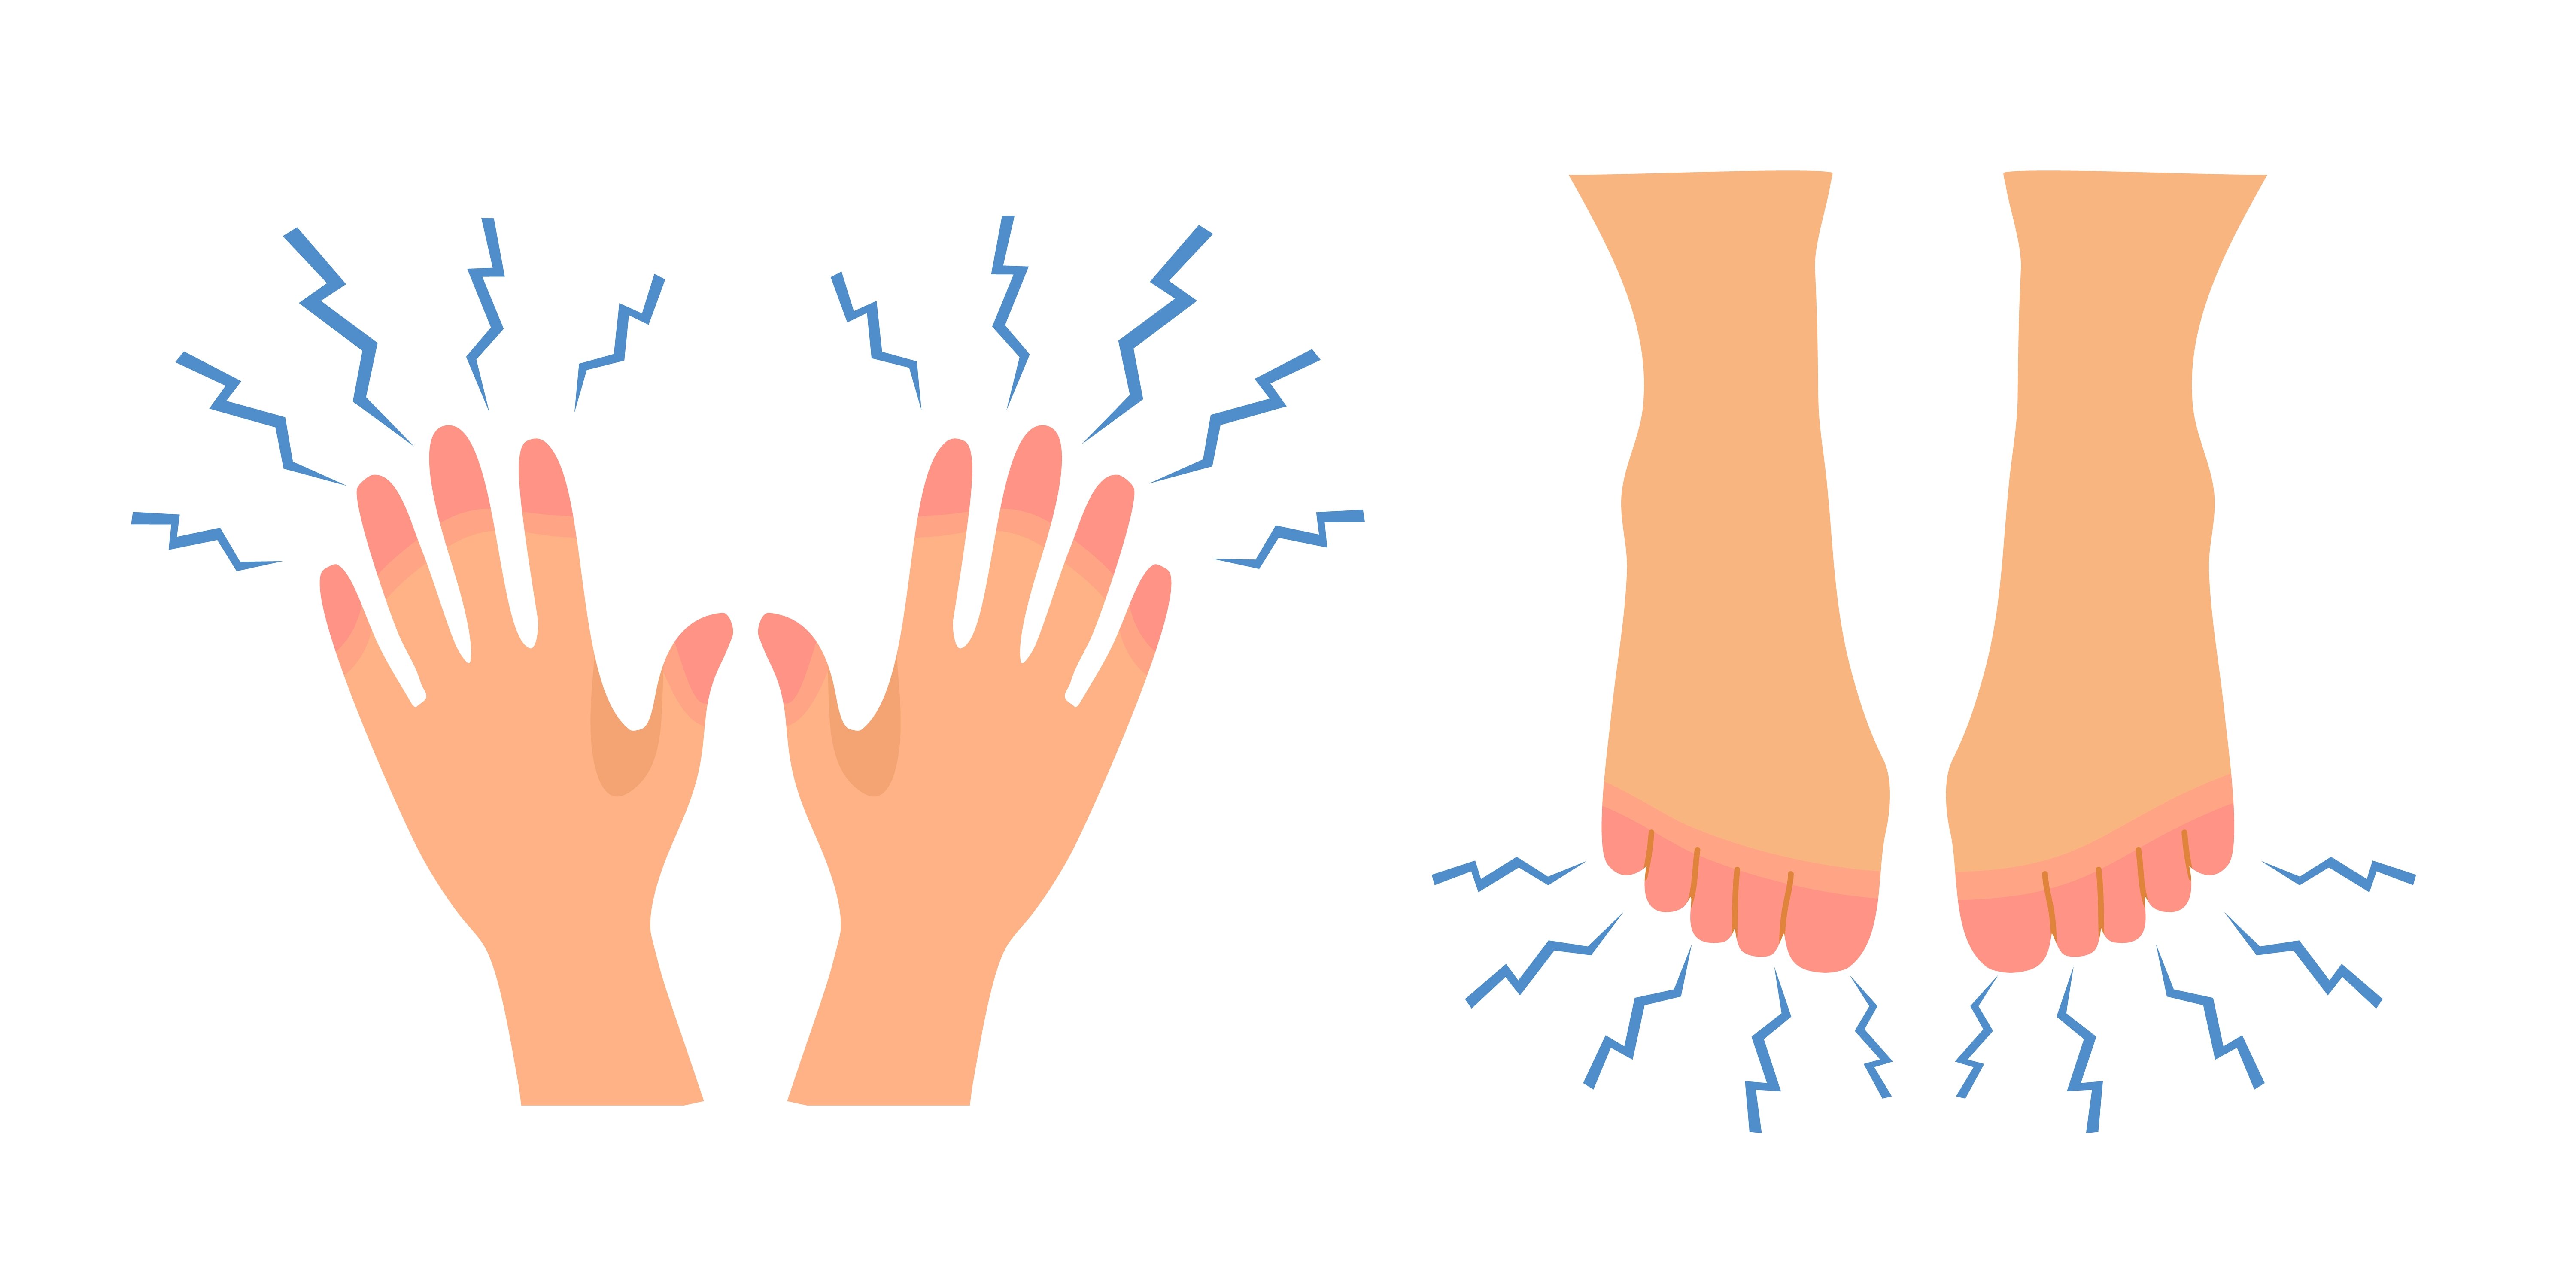 Do I Have Neuropathy? - The early signs of neuropathy